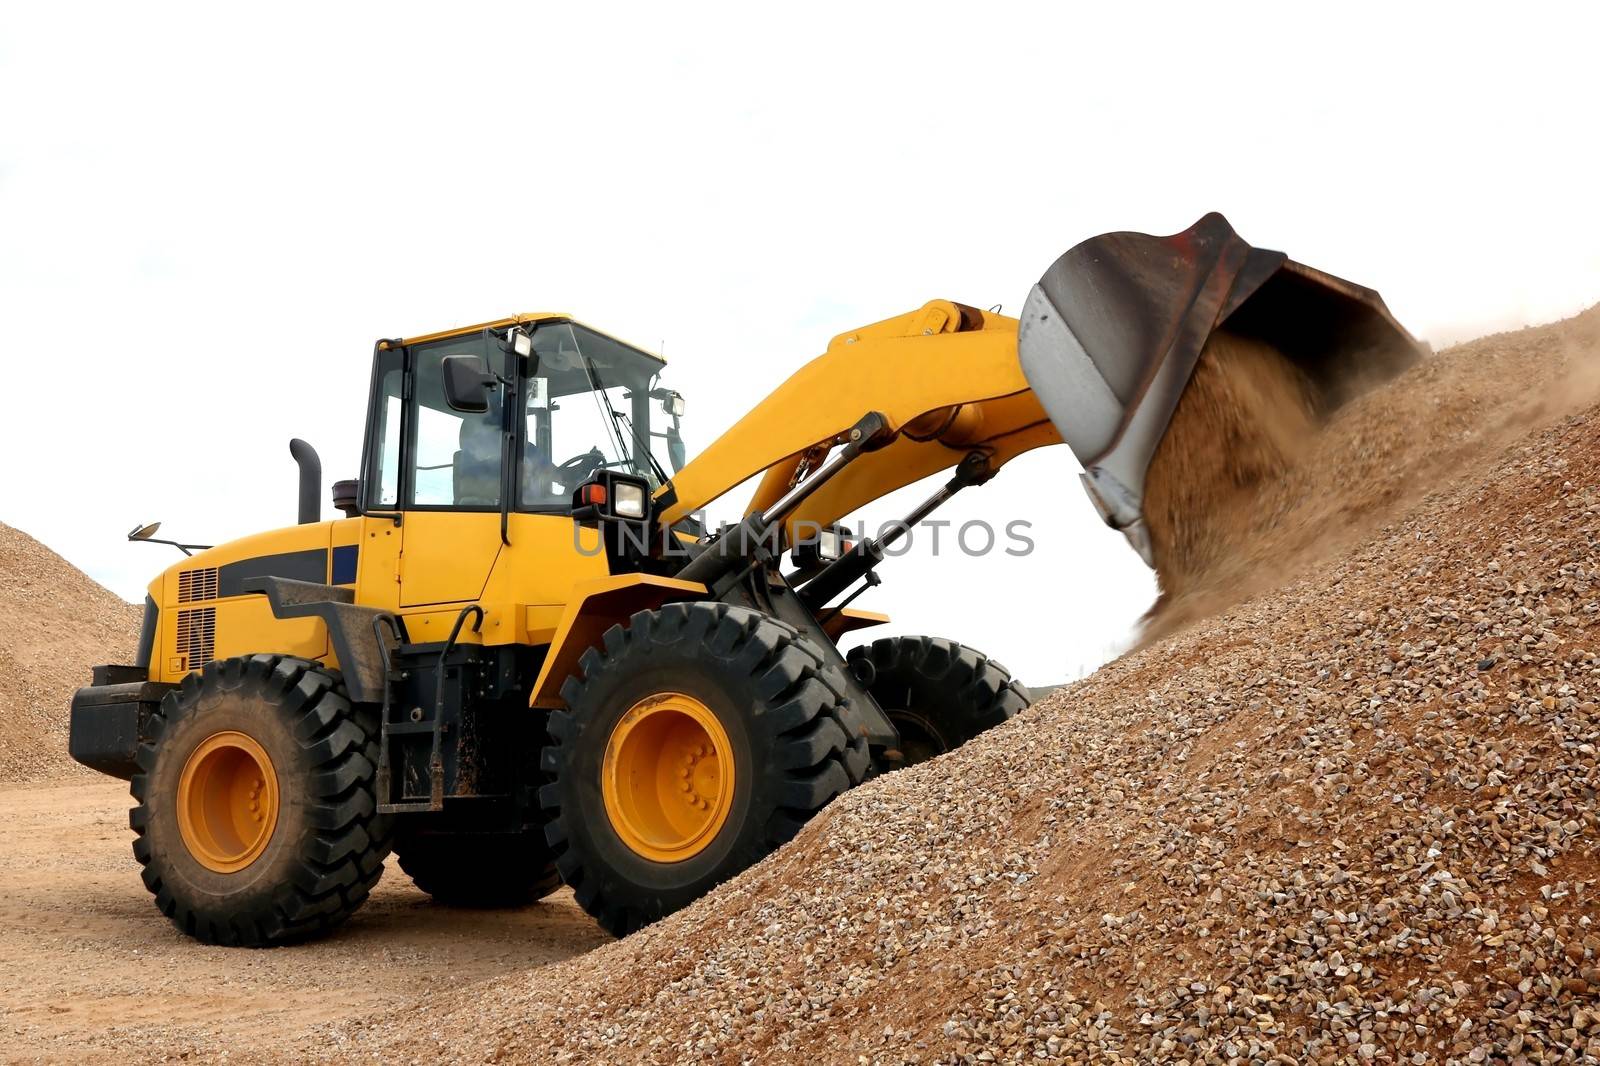 Bulldozer dumping stone and sand in a mining quarry